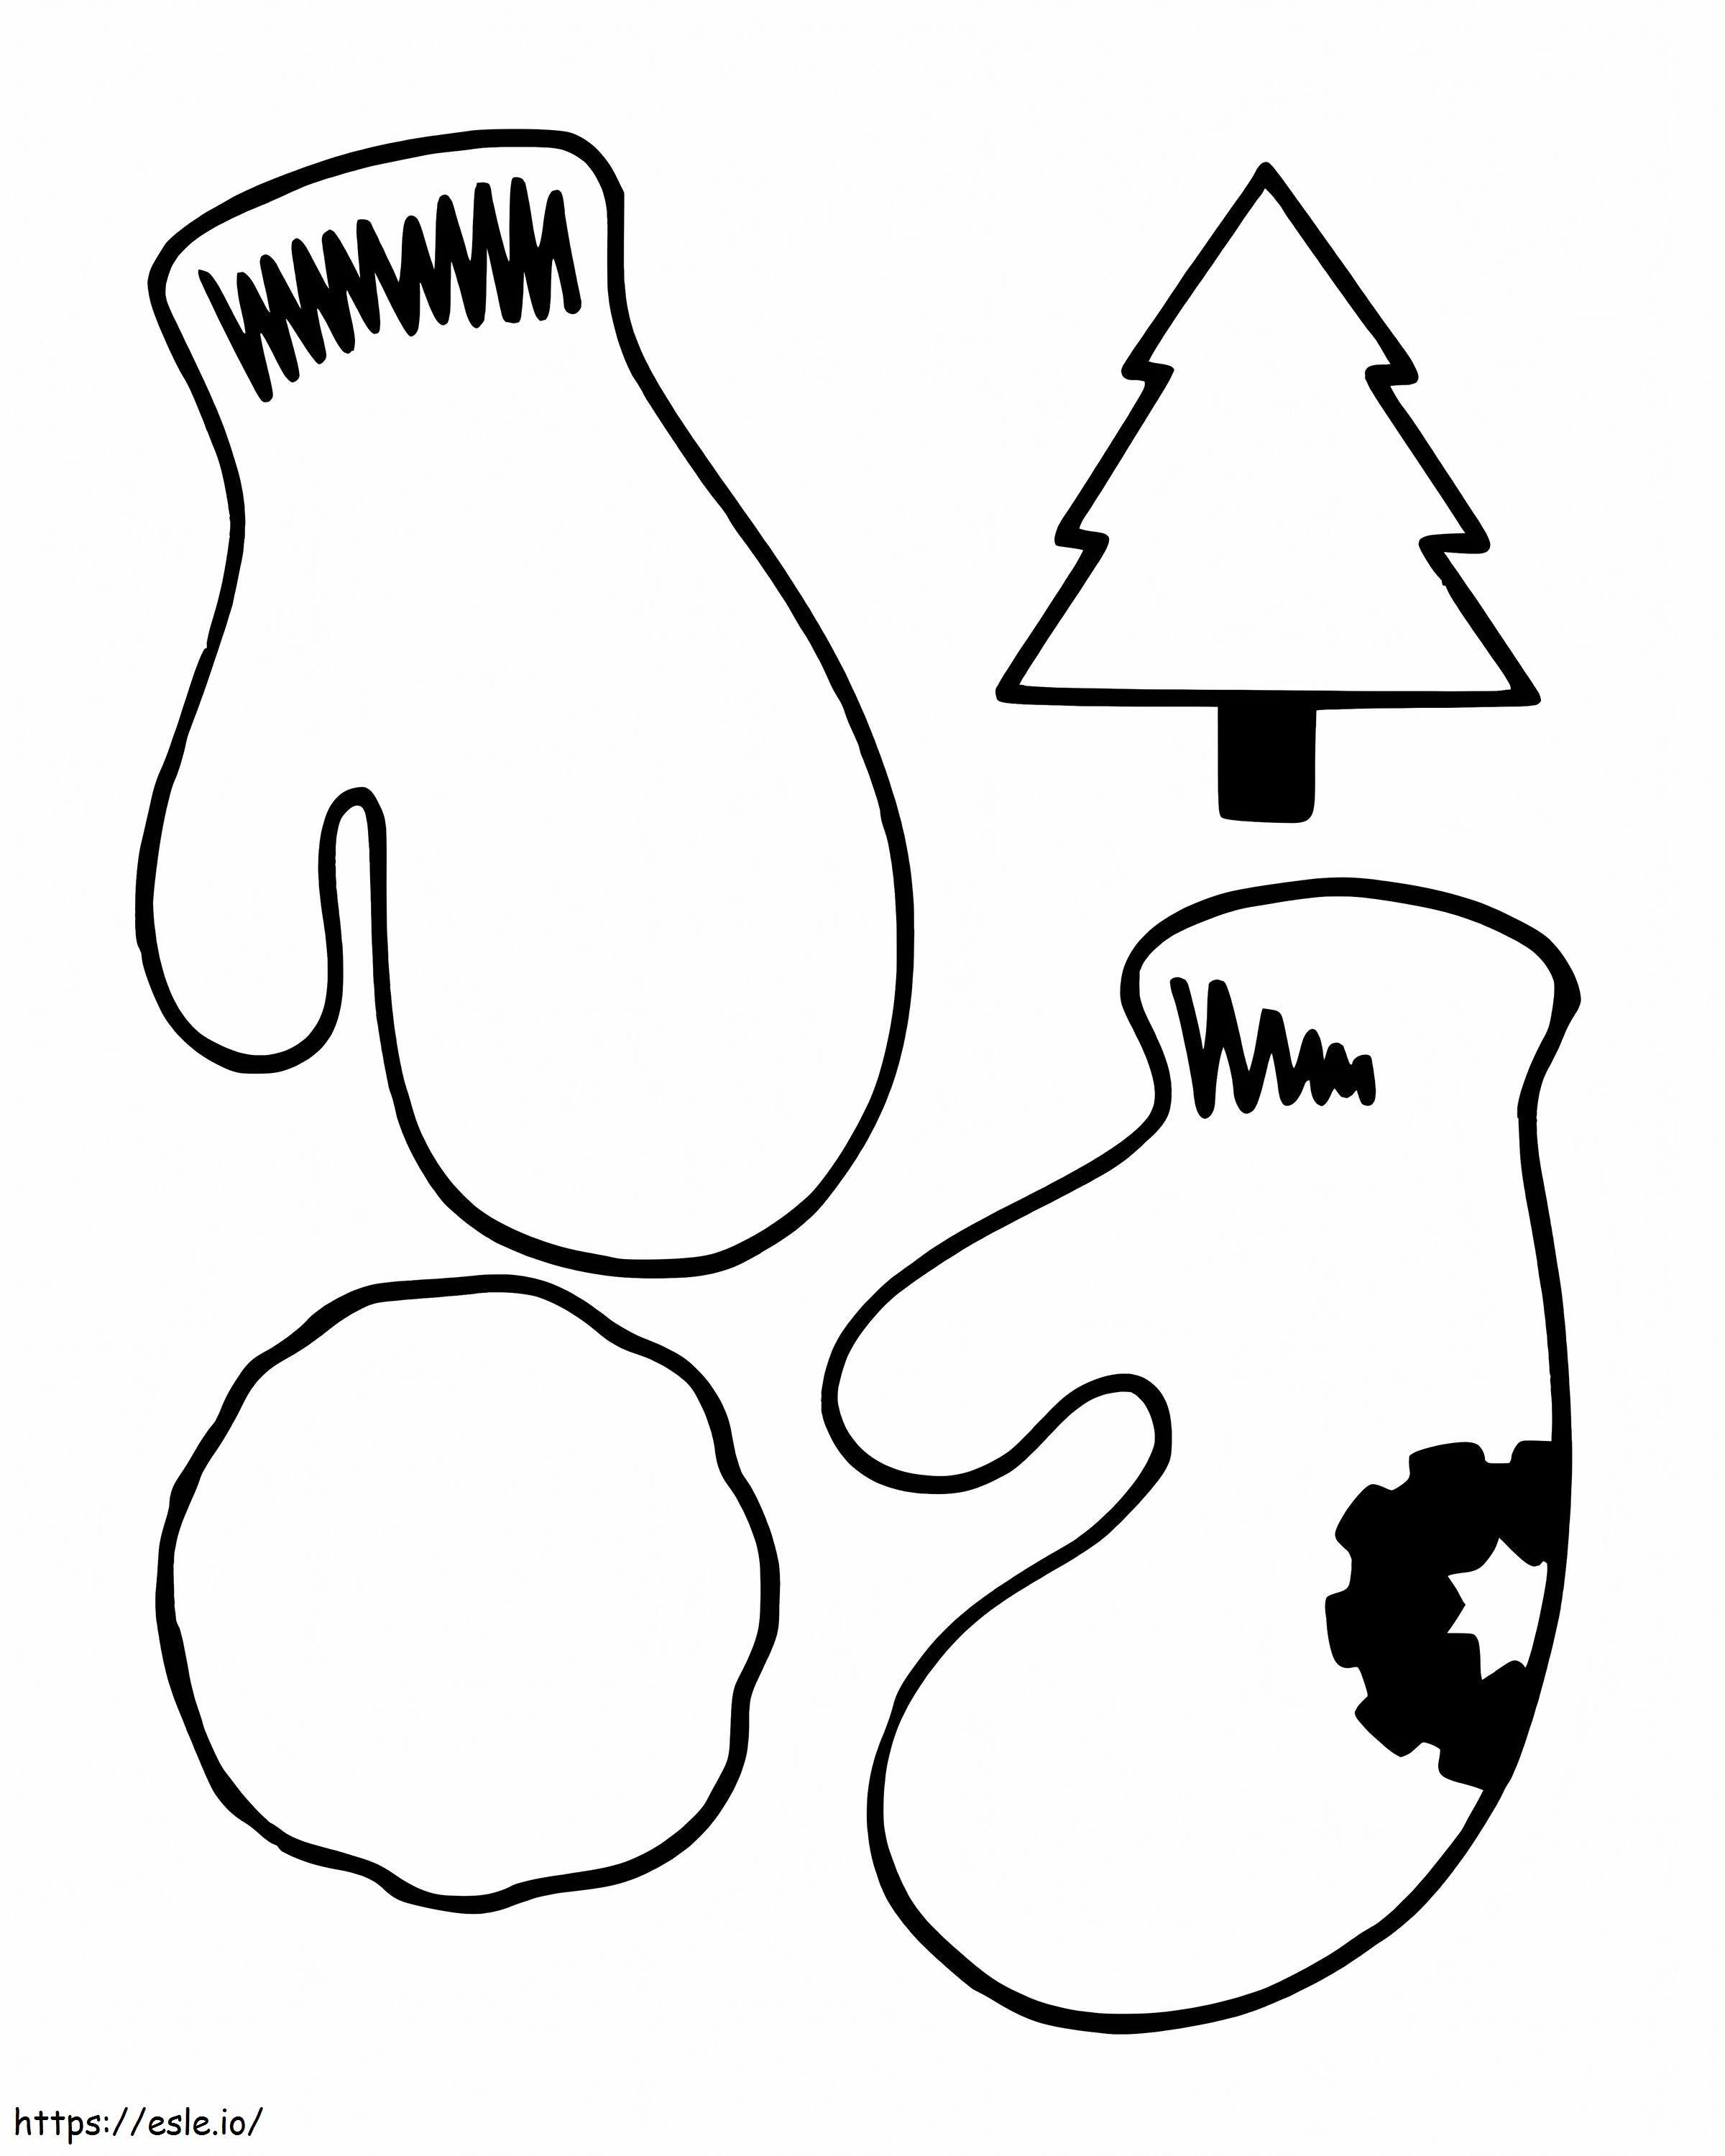 Mittens For Christmas coloring page